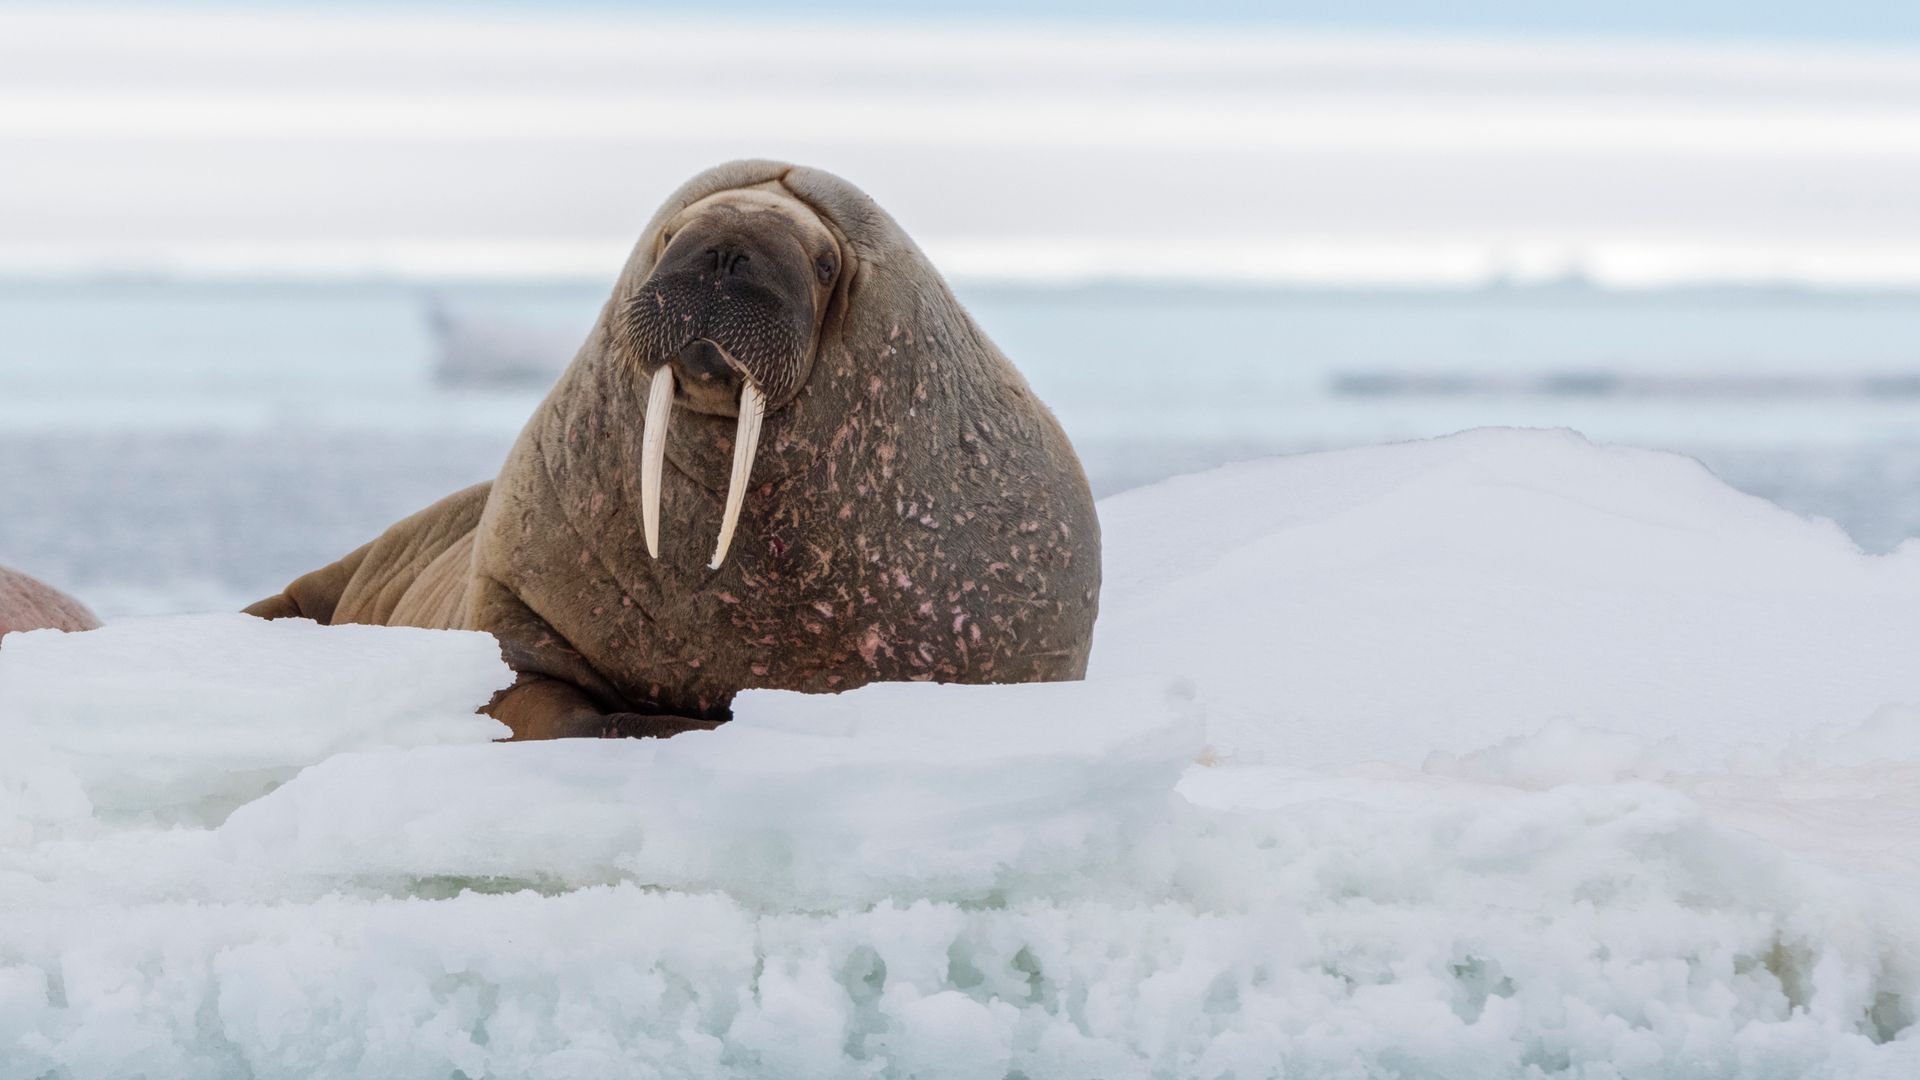 Tourist fined for getting too close to Walrus